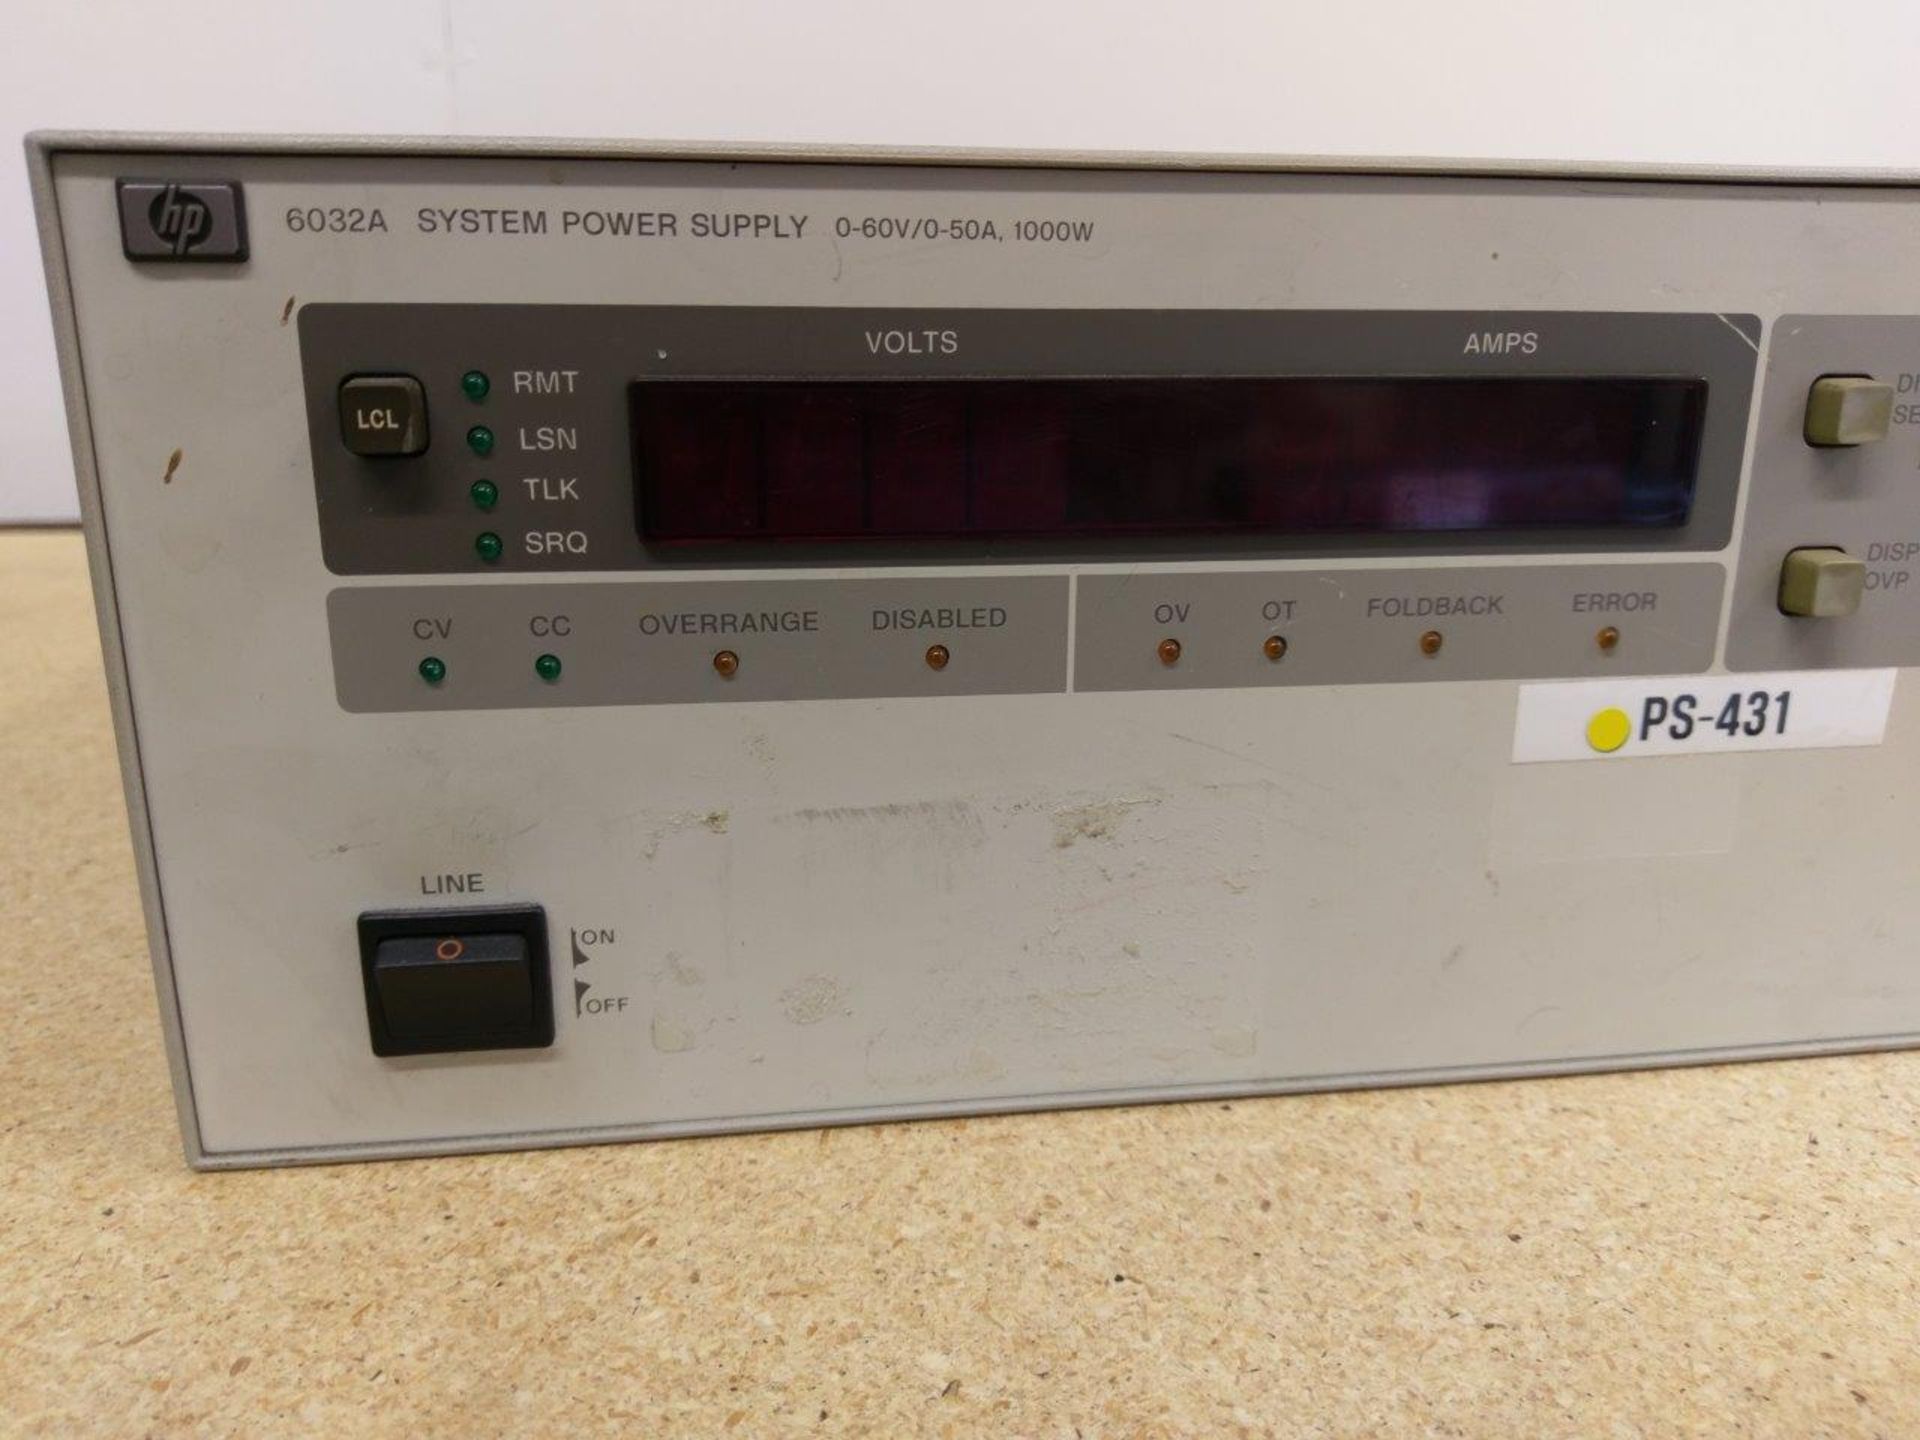 HP Hewlett Packard Model # 6032A System Power Supply - Image 2 of 5